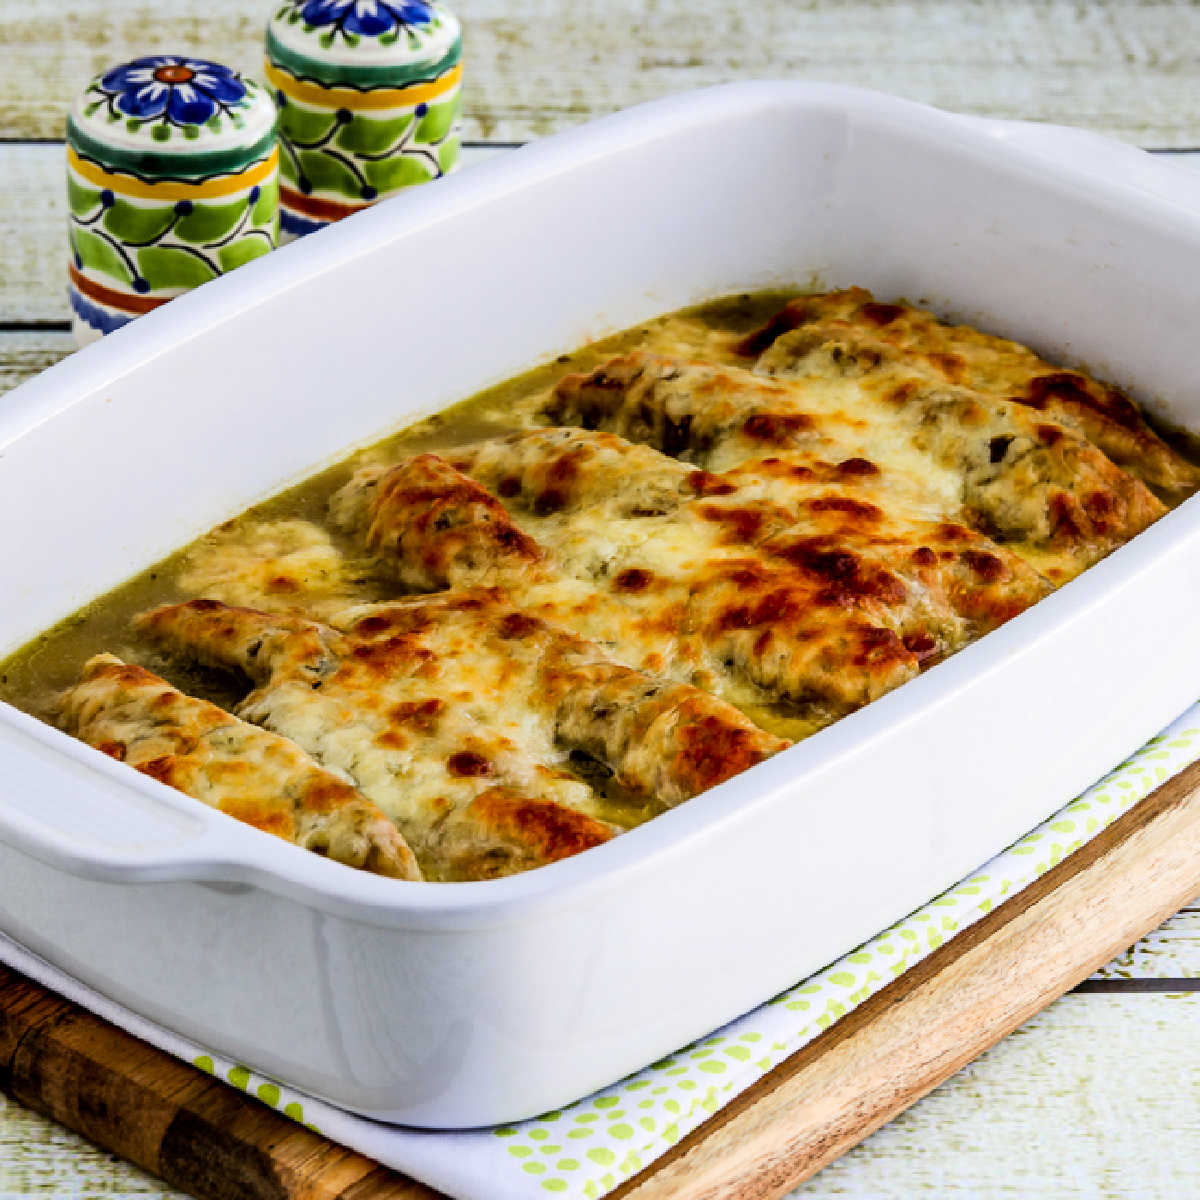 Square image of Salsa Verde Chicken Bake shown in baking dish with Mexican salt-pepper shakers in background.